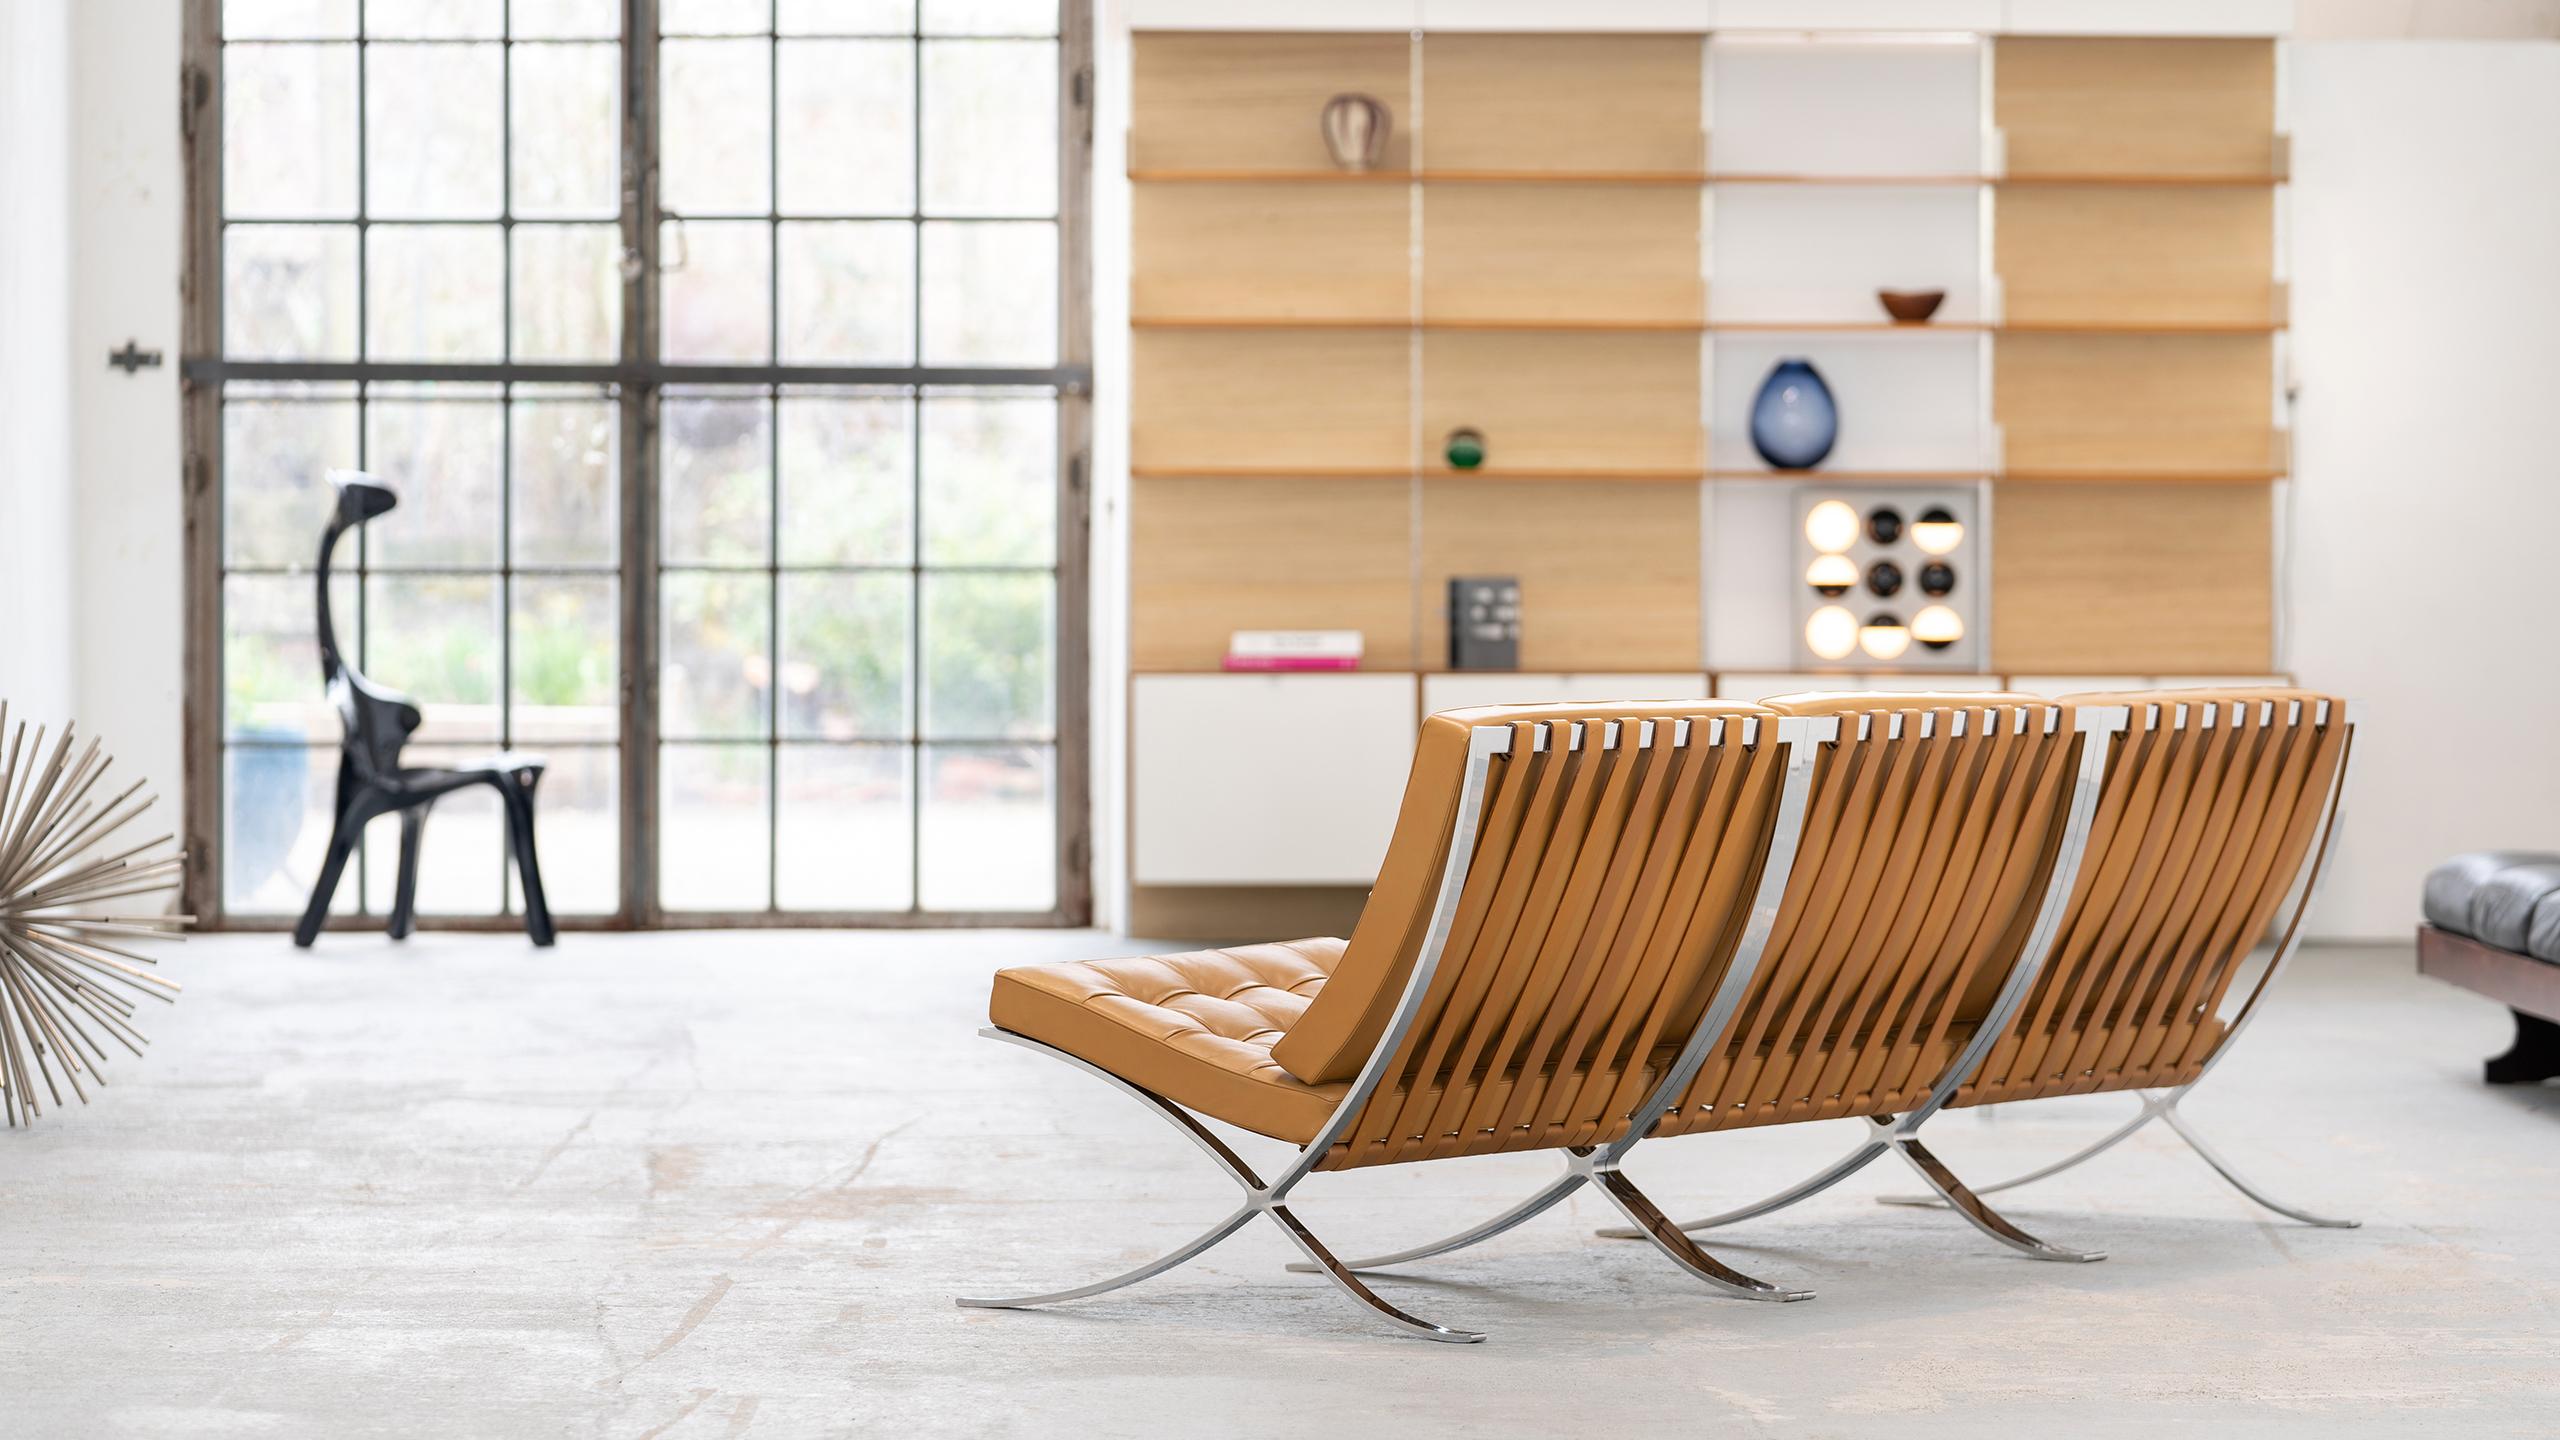 L. Mies van der Rohe, 3 Barcelona Chair, 1962 Edition by Knoll International 5